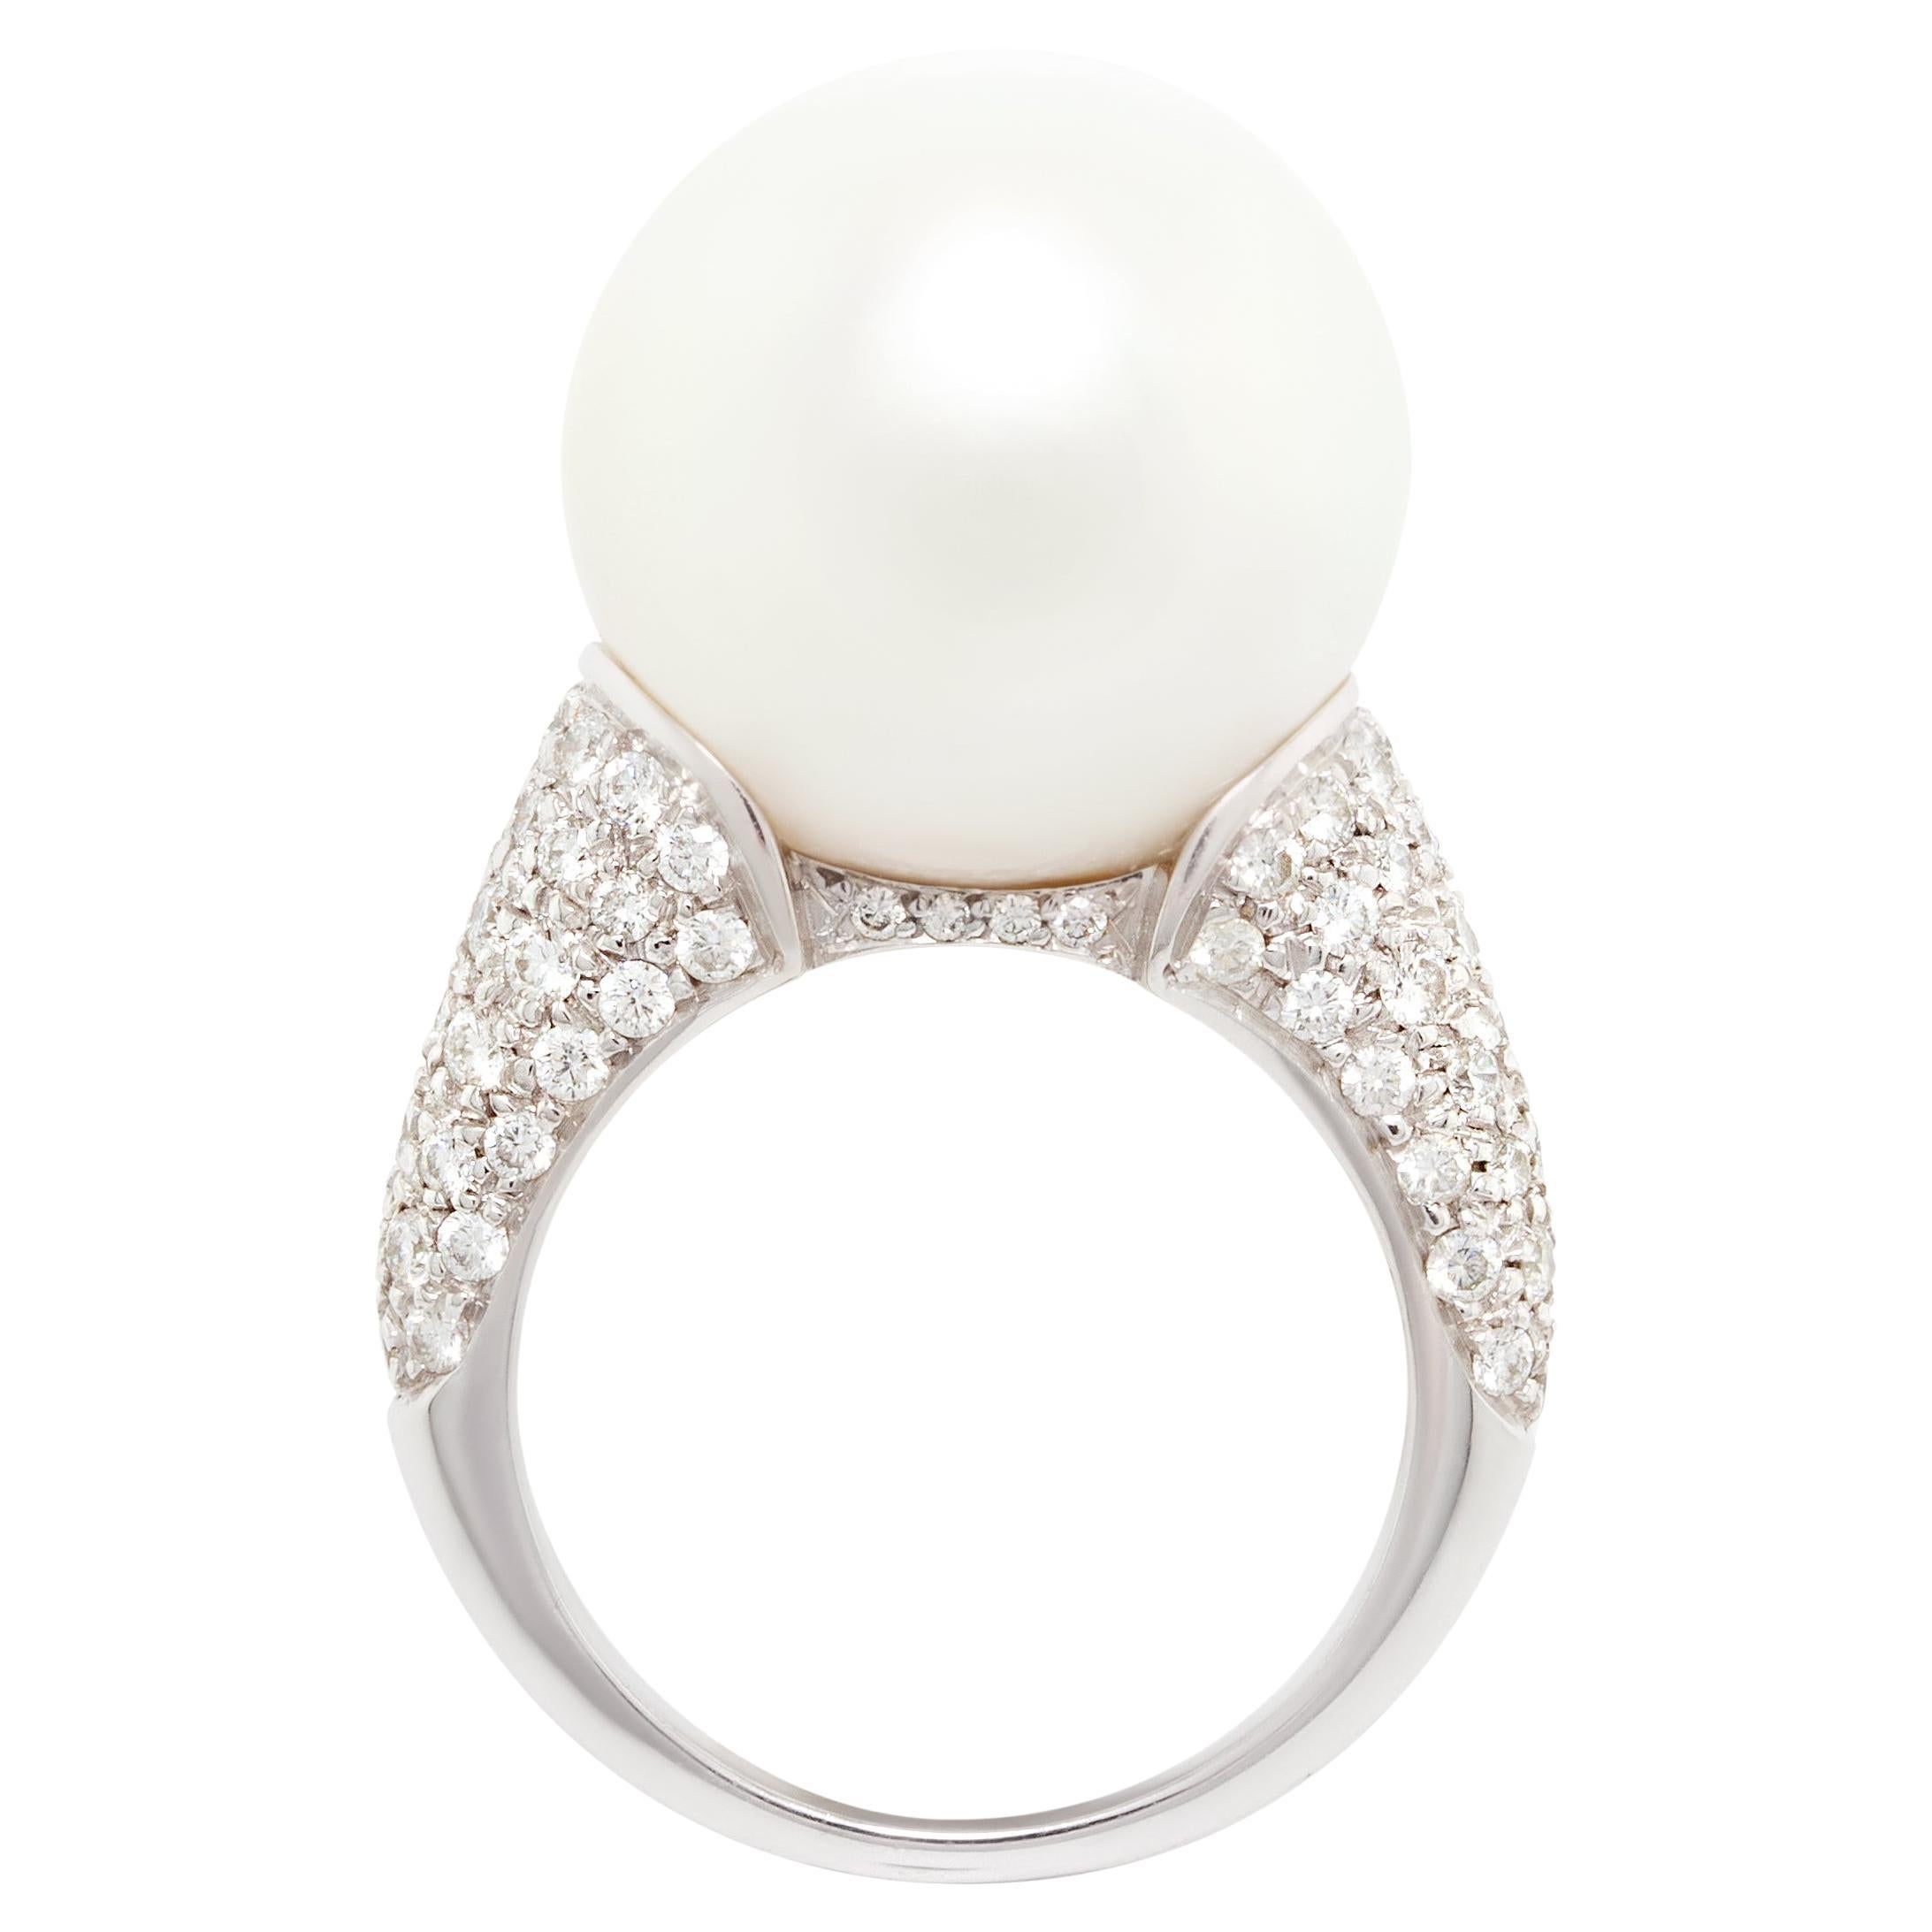 Ella Gafter 16mm South Sea Pearl Diamond Cocktail Ring